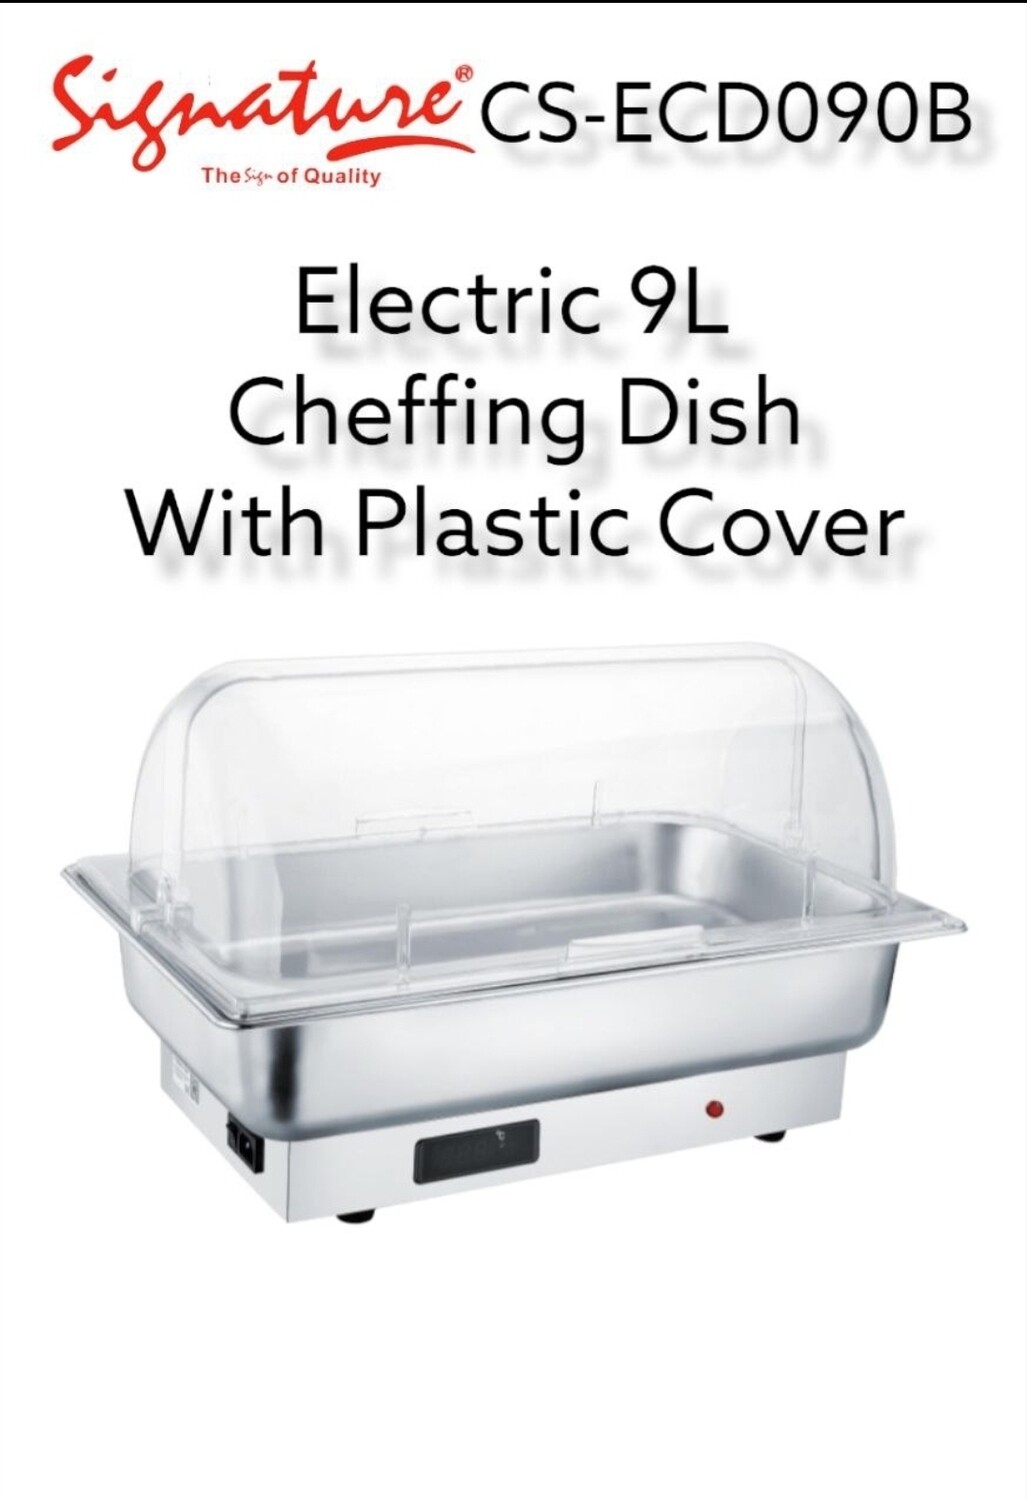 Signature 9 Ltr Electric Cheffing Dish with Plastic Cover CS-ECD-09B